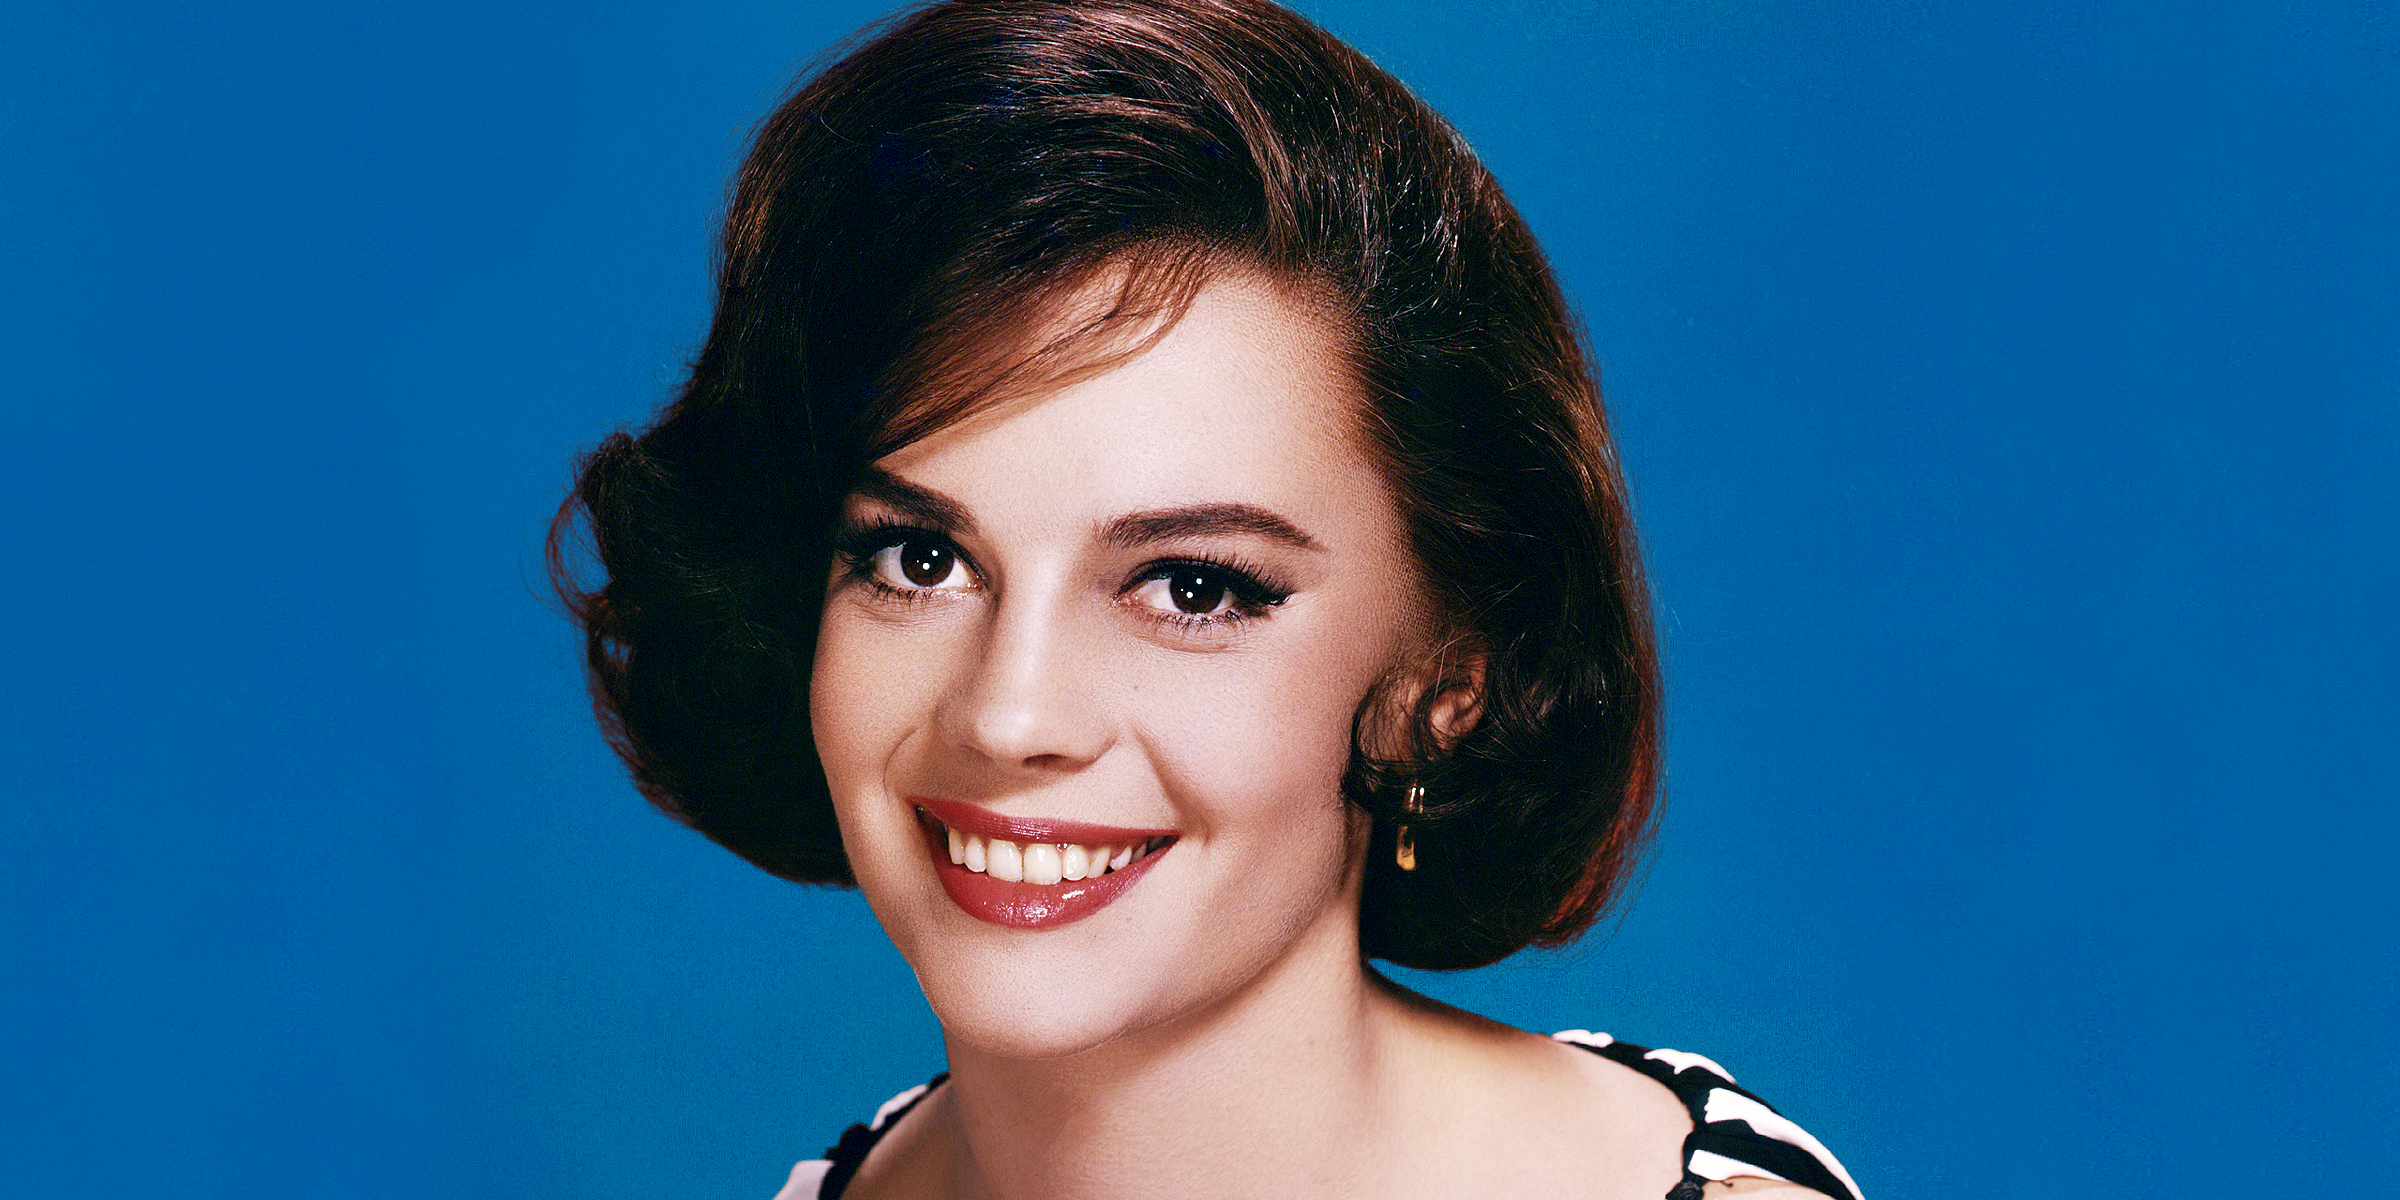 Natalie Wood | Source: Getty Images